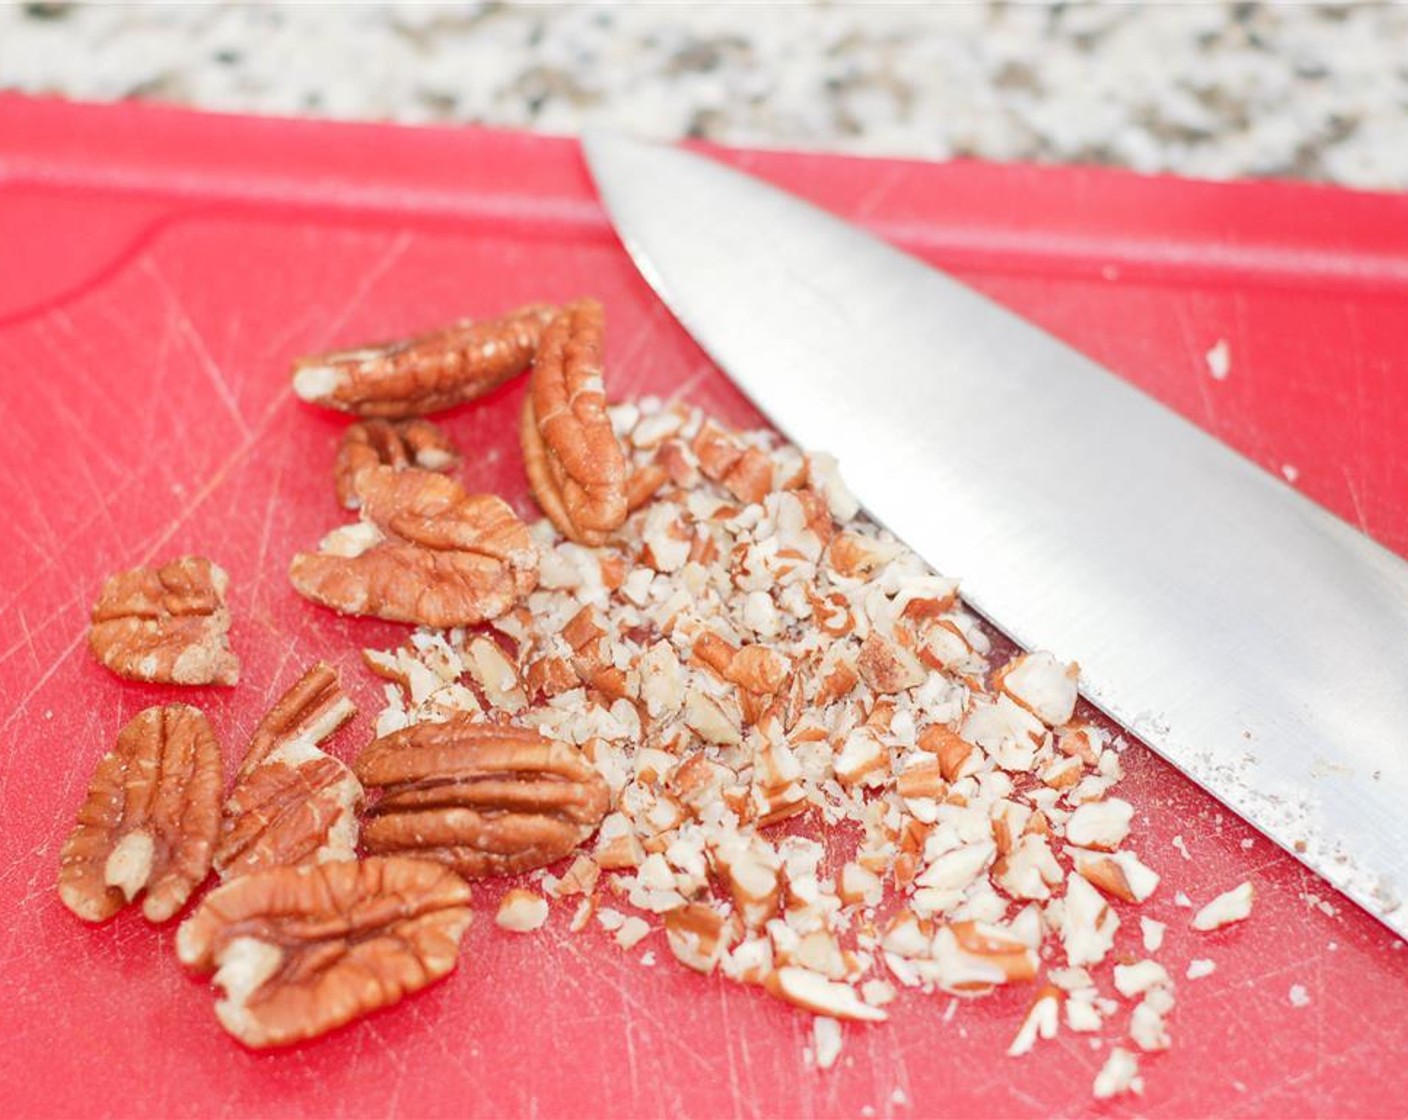 step 1 Soften Butter (2 Tbsp) by leaving it out at room temperature. In a small bowl, combine Rice Flour (1 cup), Baking Soda (1/4 tsp), and Salt (1/4 tsp). If using, chop the Pecans (1/4 cup).